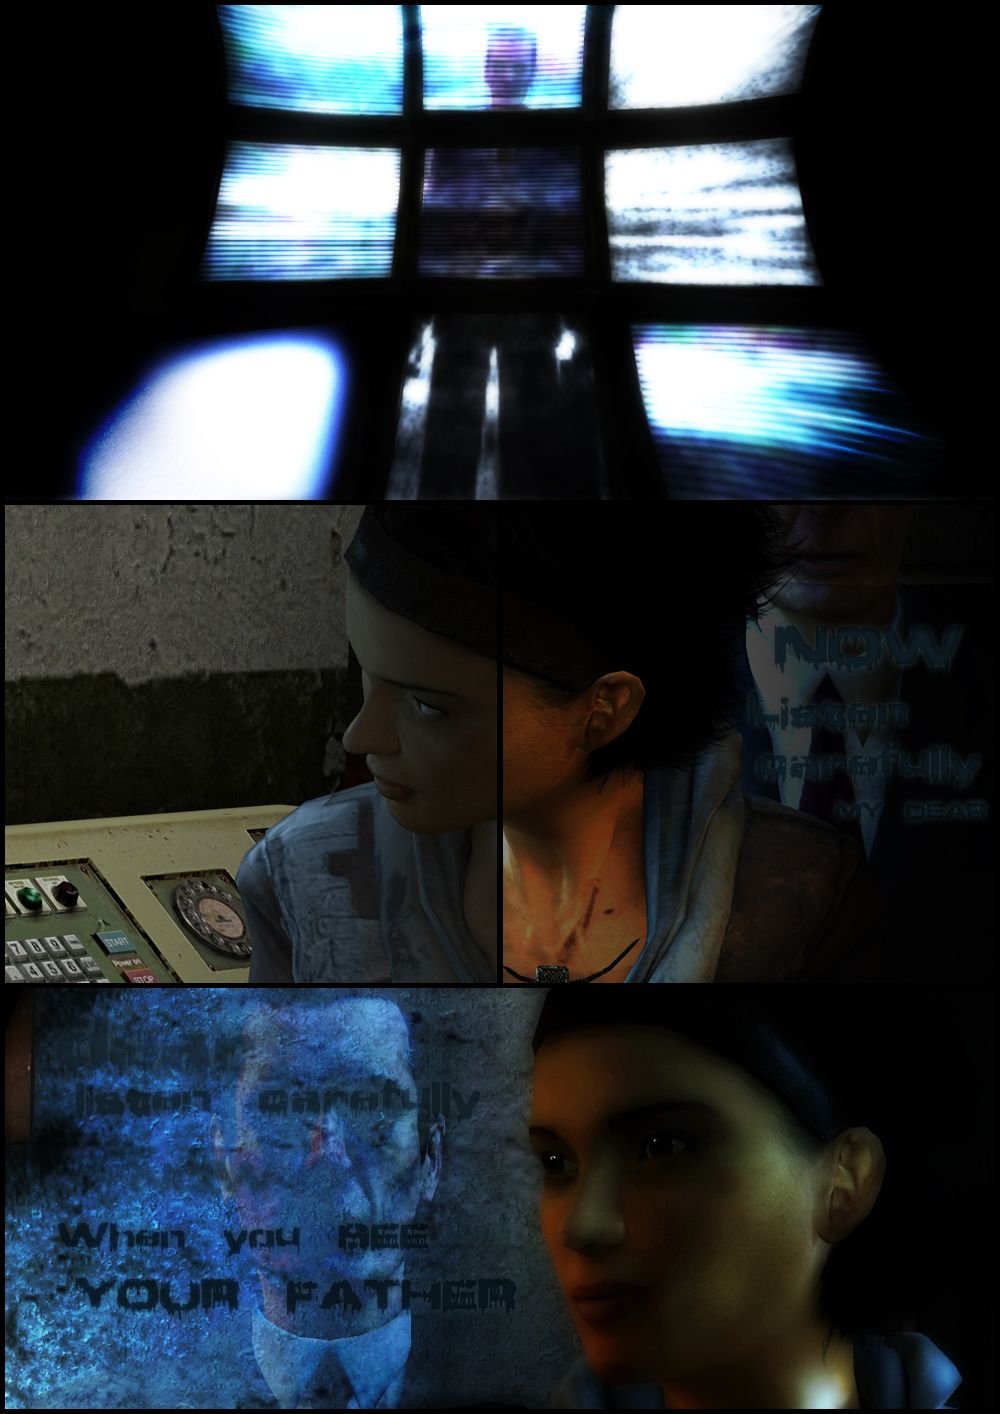 The silhouette of the G-Man can be seen on the screen. Alyx stares at it as a ghostly figure of the G-Man appears behind her and tells her to listen carefully. Alyx's face goes expressionless as the spectral G-Man tells her what to do when she sees her father.